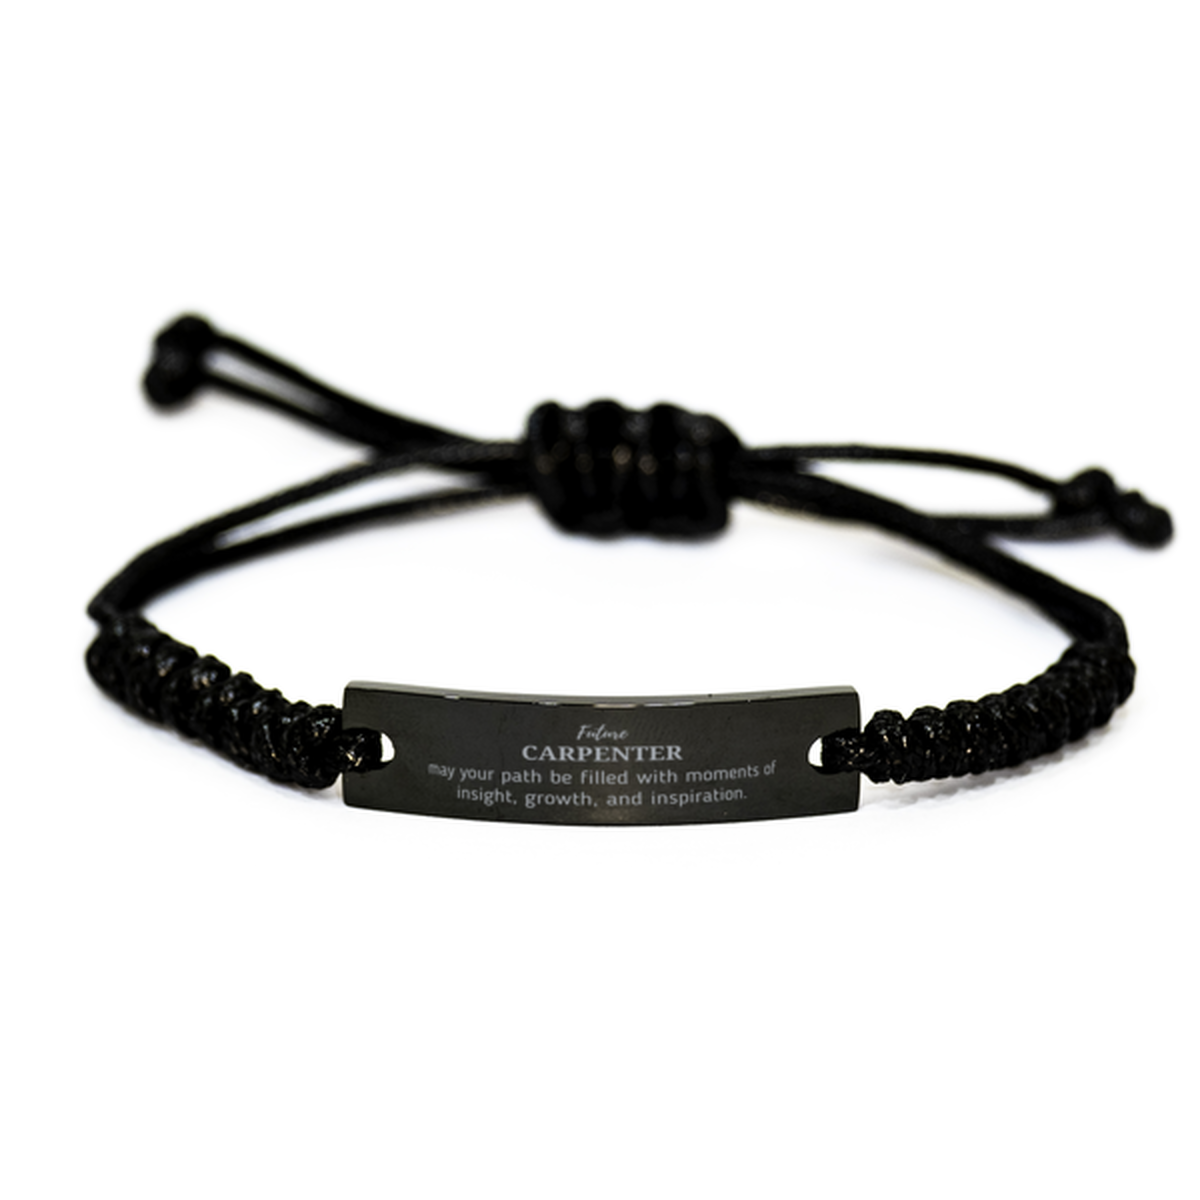 Future Carpenter Gifts, May your path be filled with moments of insight, Graduation Gifts for New Carpenter, Christmas Unique Black Rope Bracelet For Men, Women, Friends